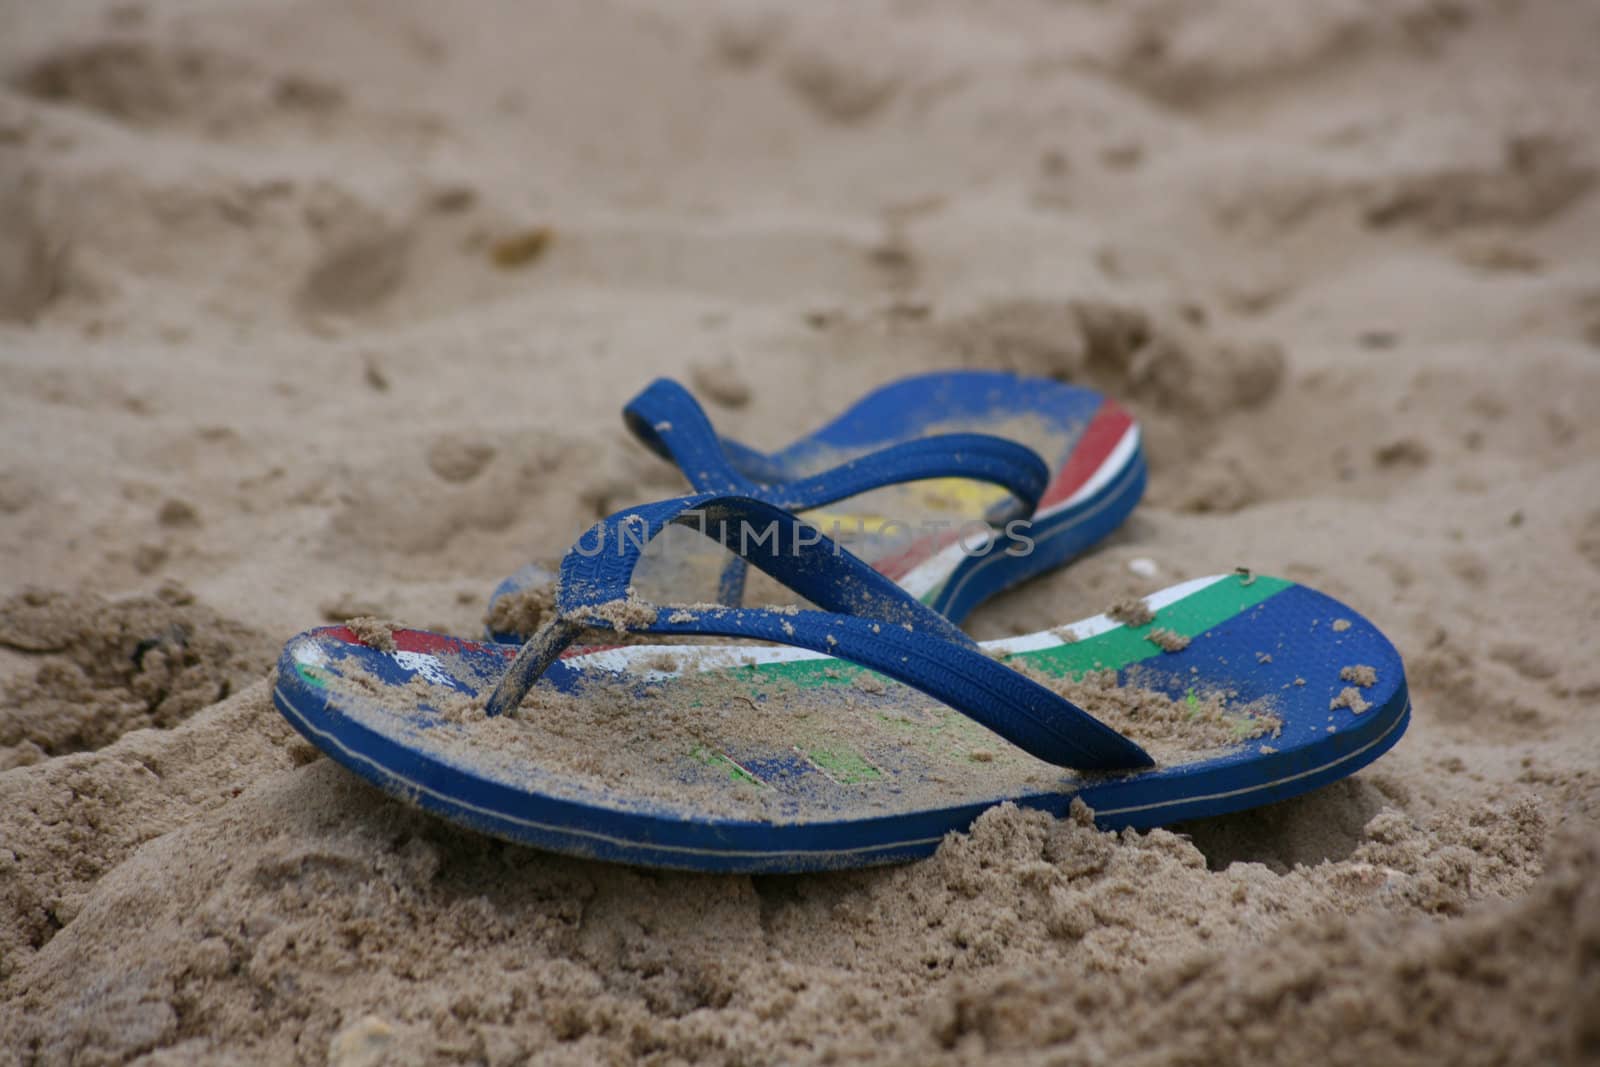 A blue pair of flip flops, or beach sandles, covered in sand and set in the sand on a beach.